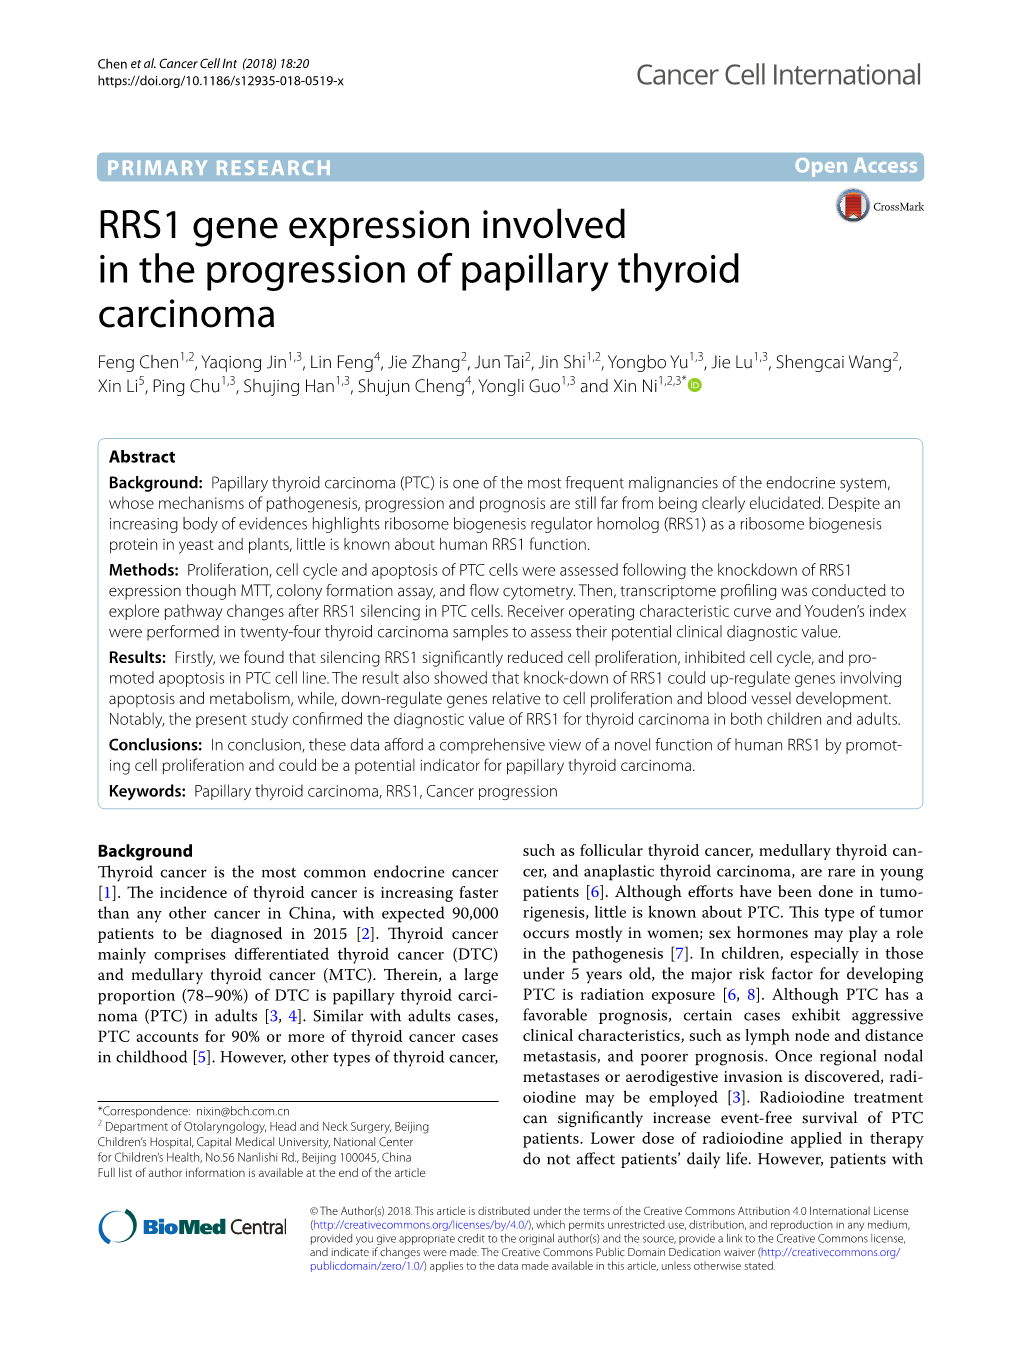 RRS1 Gene Expression Involved in the Progression of Papillary Thyroid